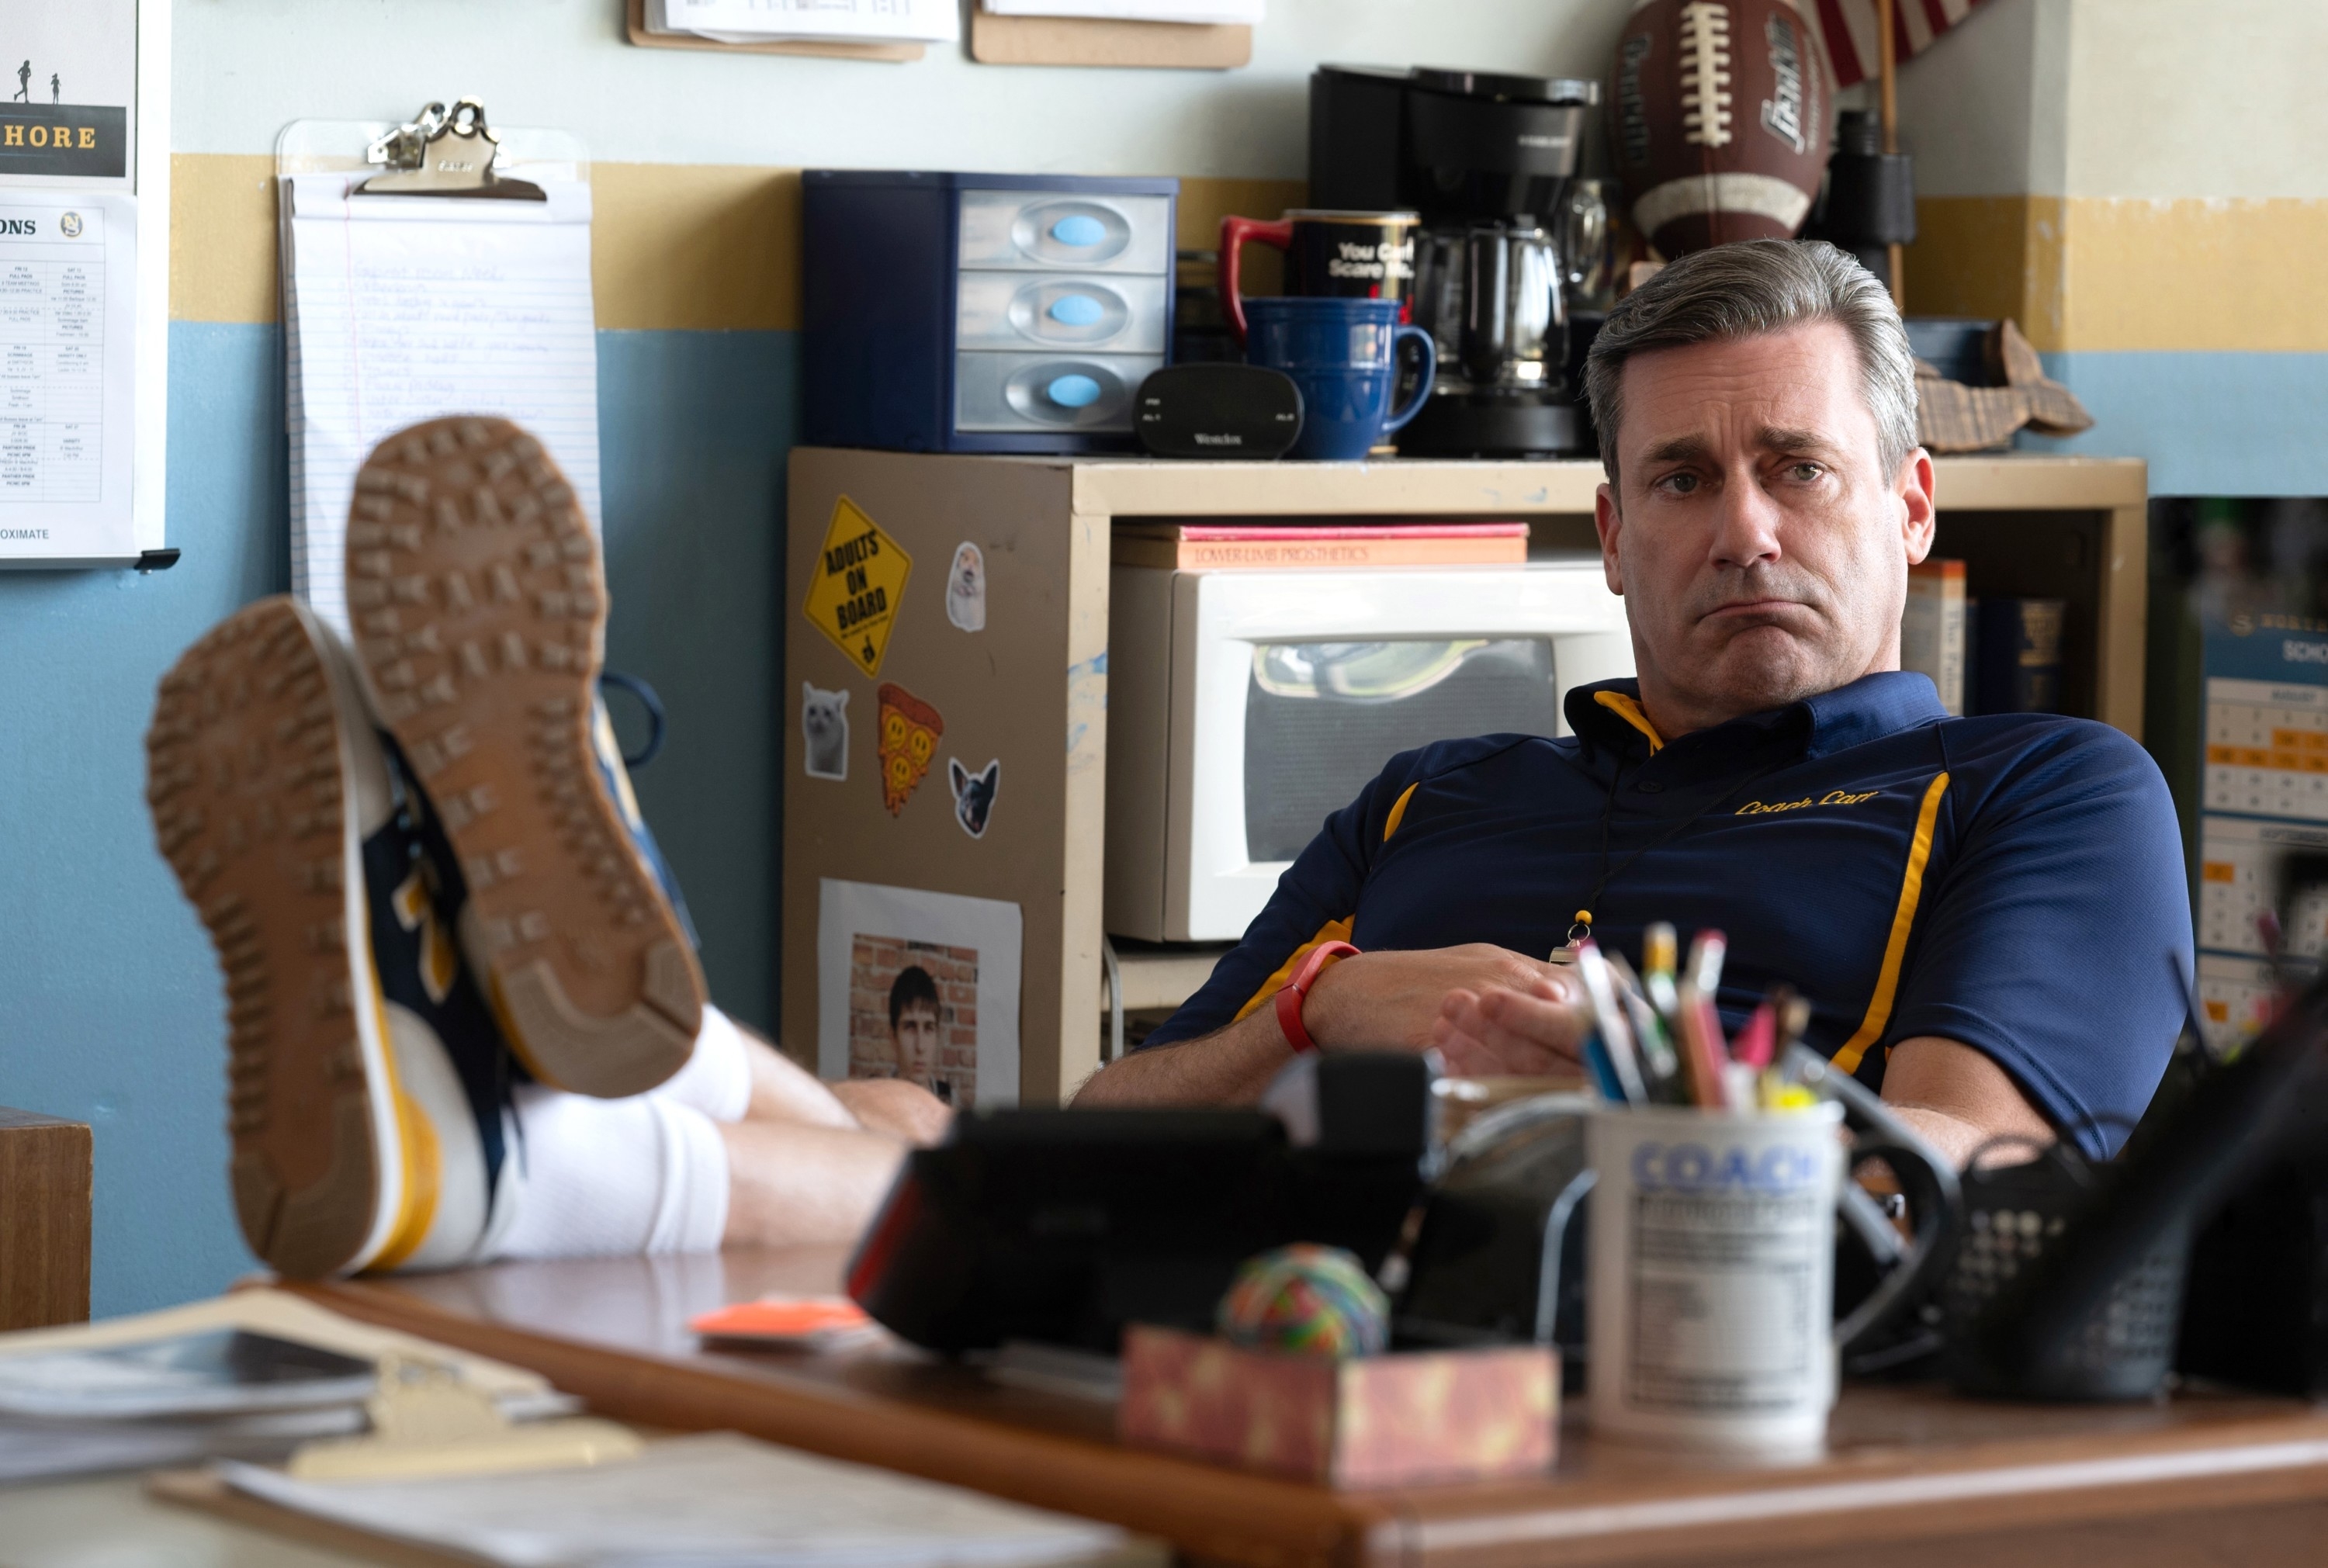 coach carr with his feet on his desk